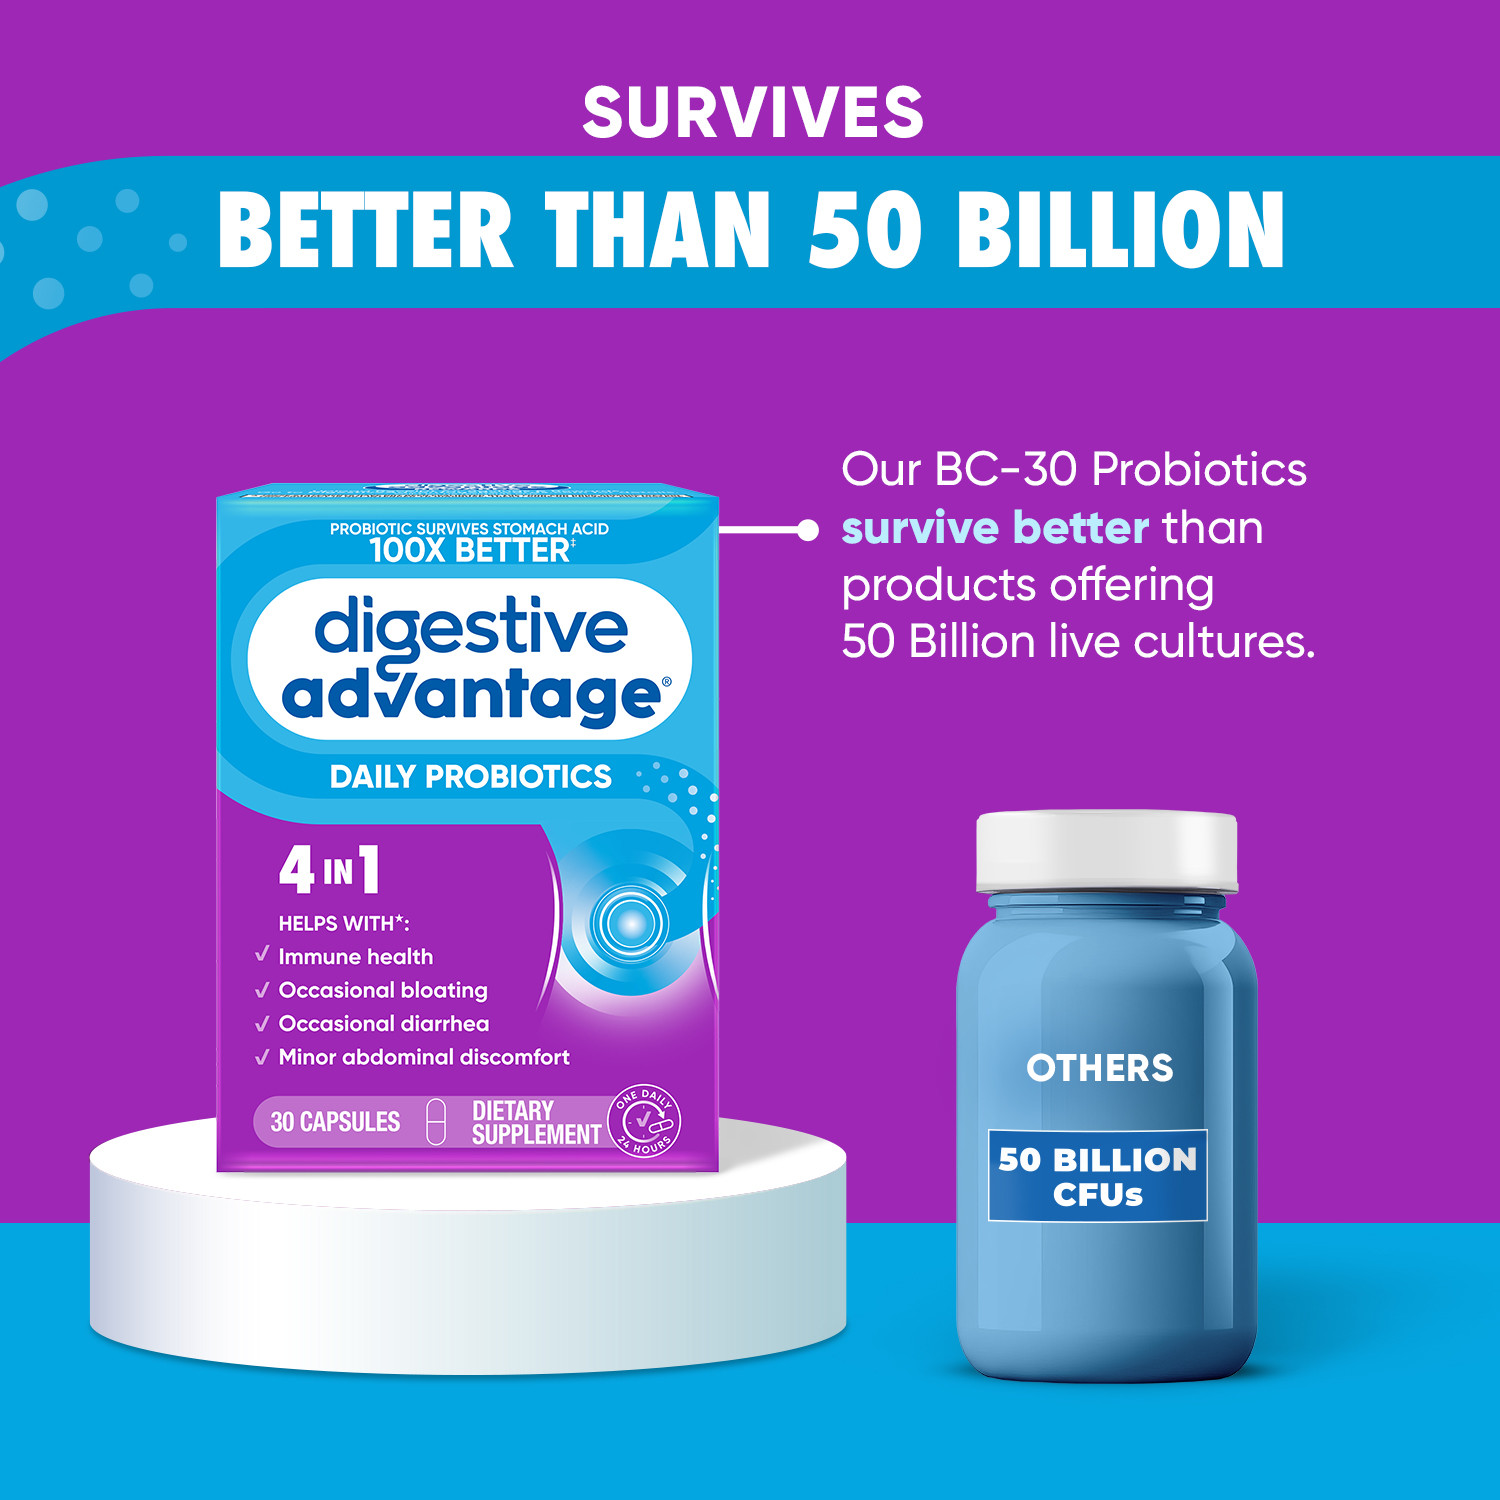 Digestive Advantage Daily Probiotic, Survives Better than 50 Billion - 30 Capsules - image 3 of 11